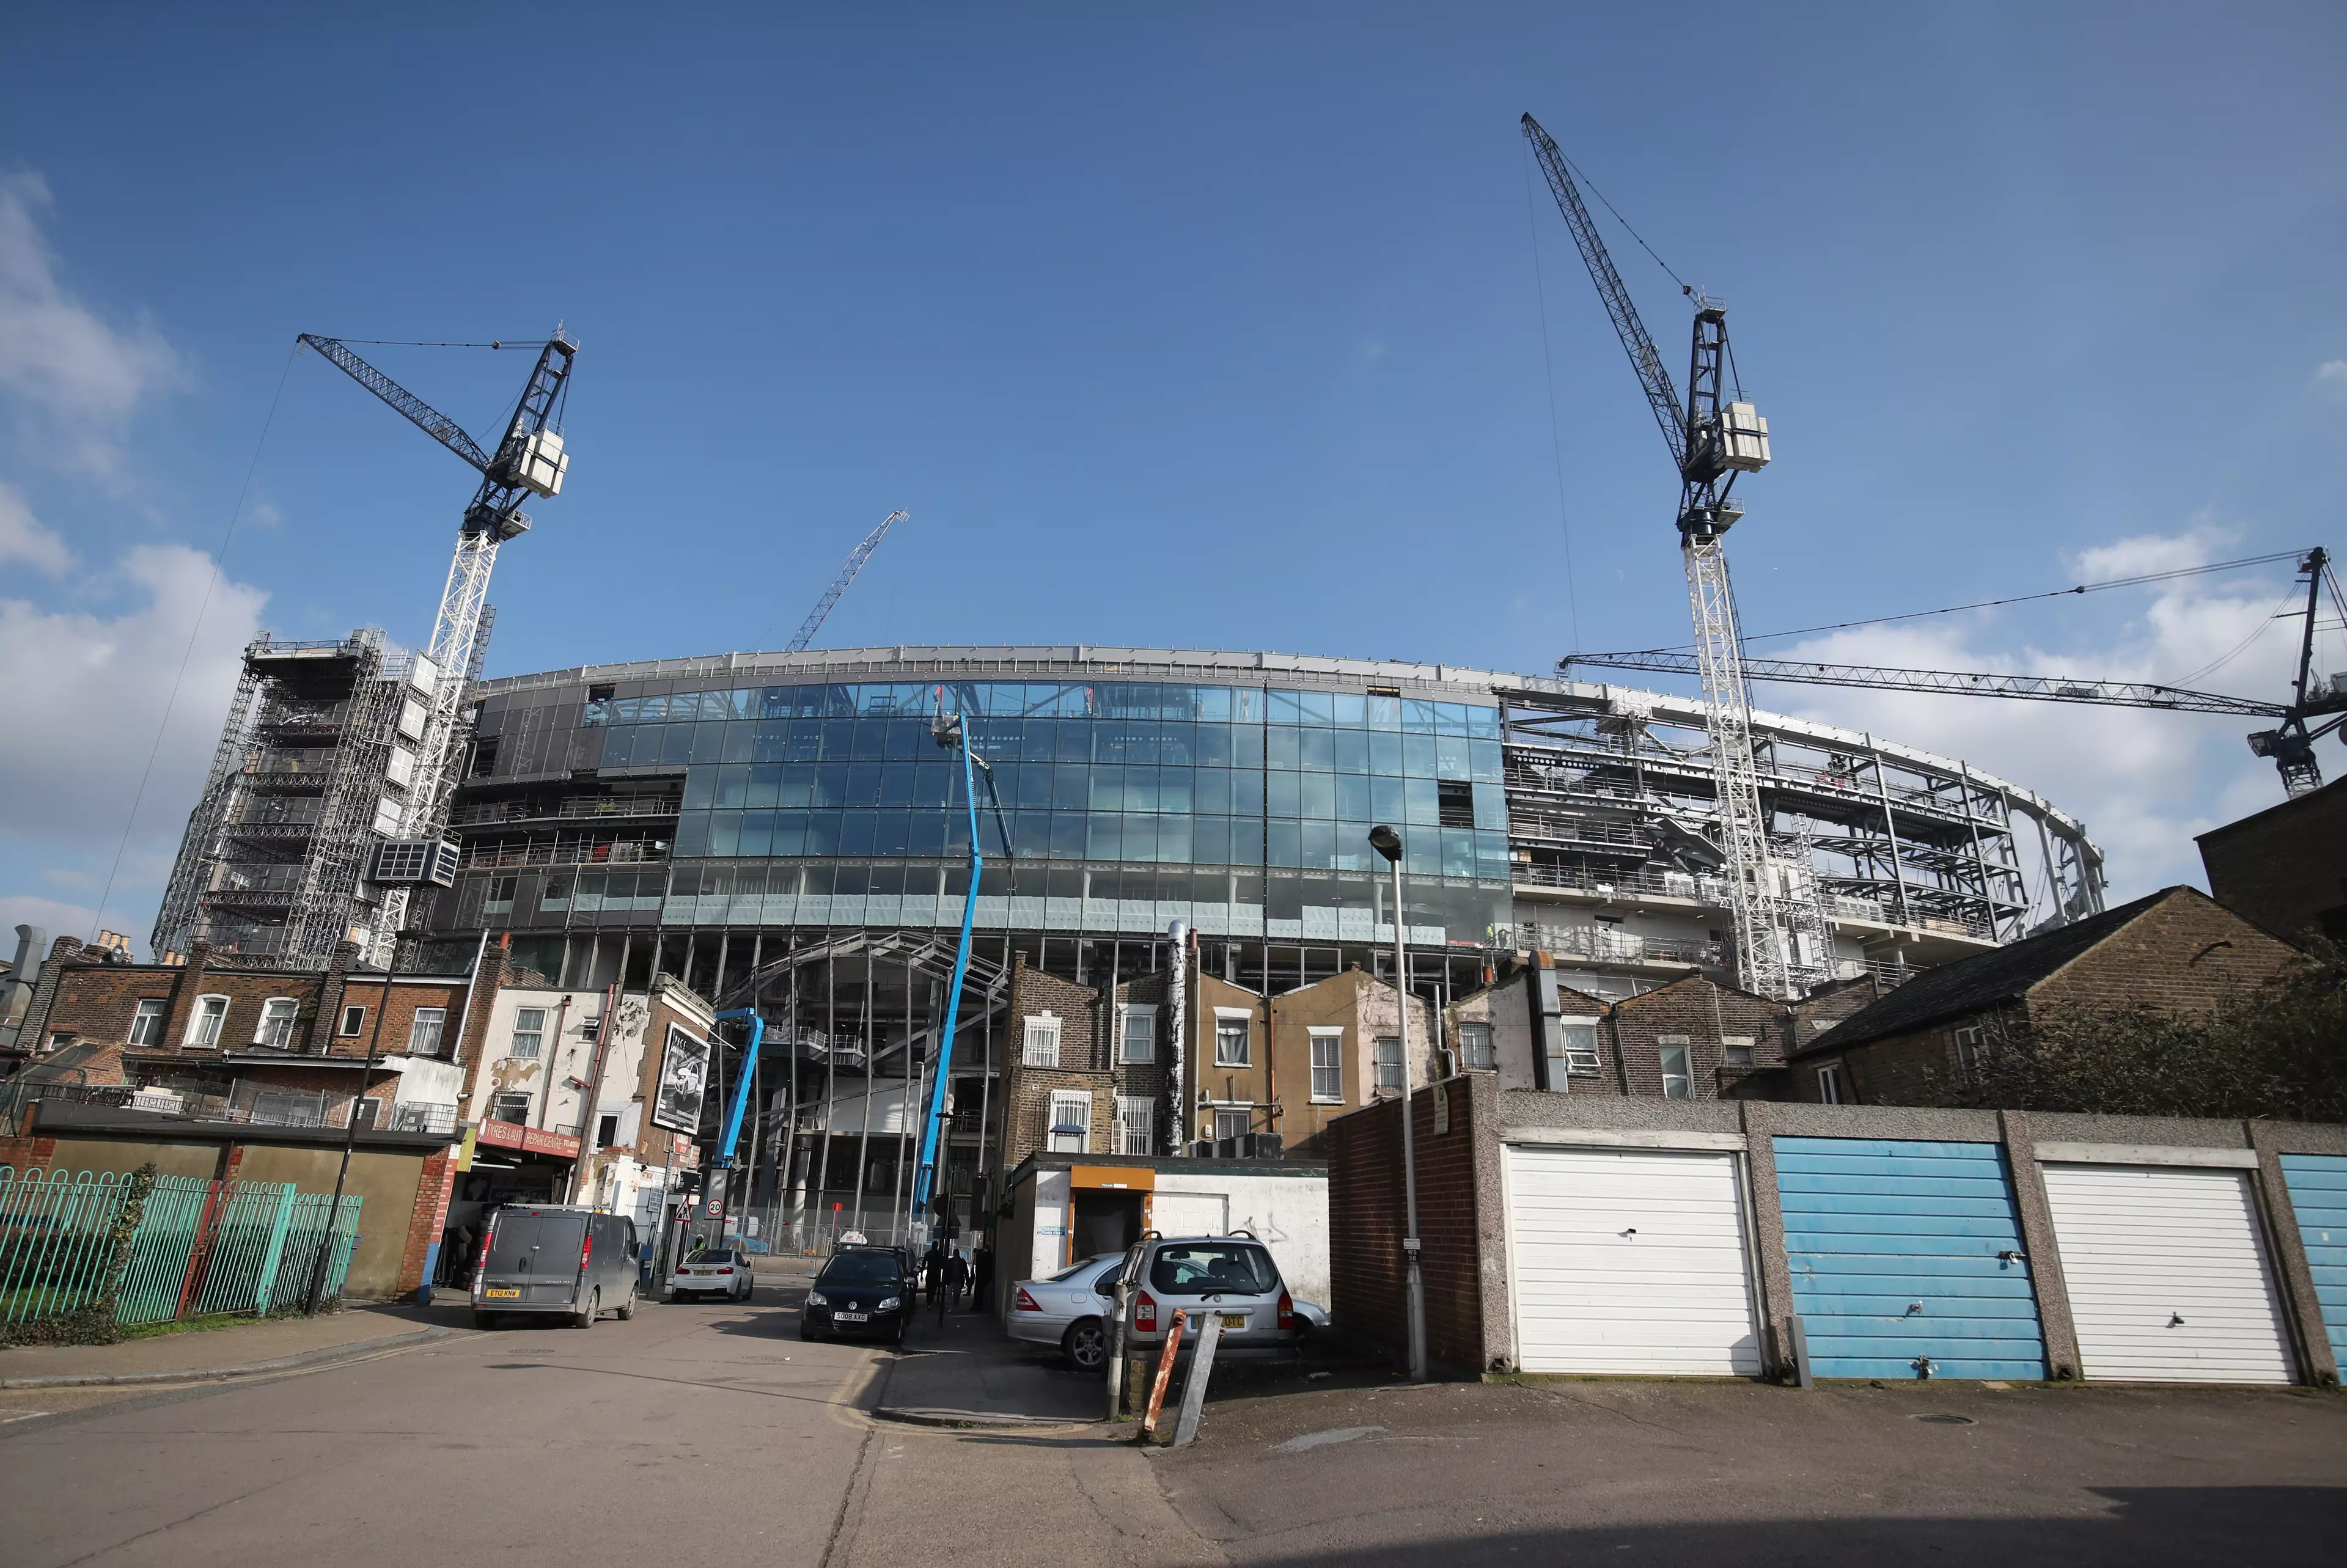 The new ground still had a lot of work to do back in January. Image: PA Images